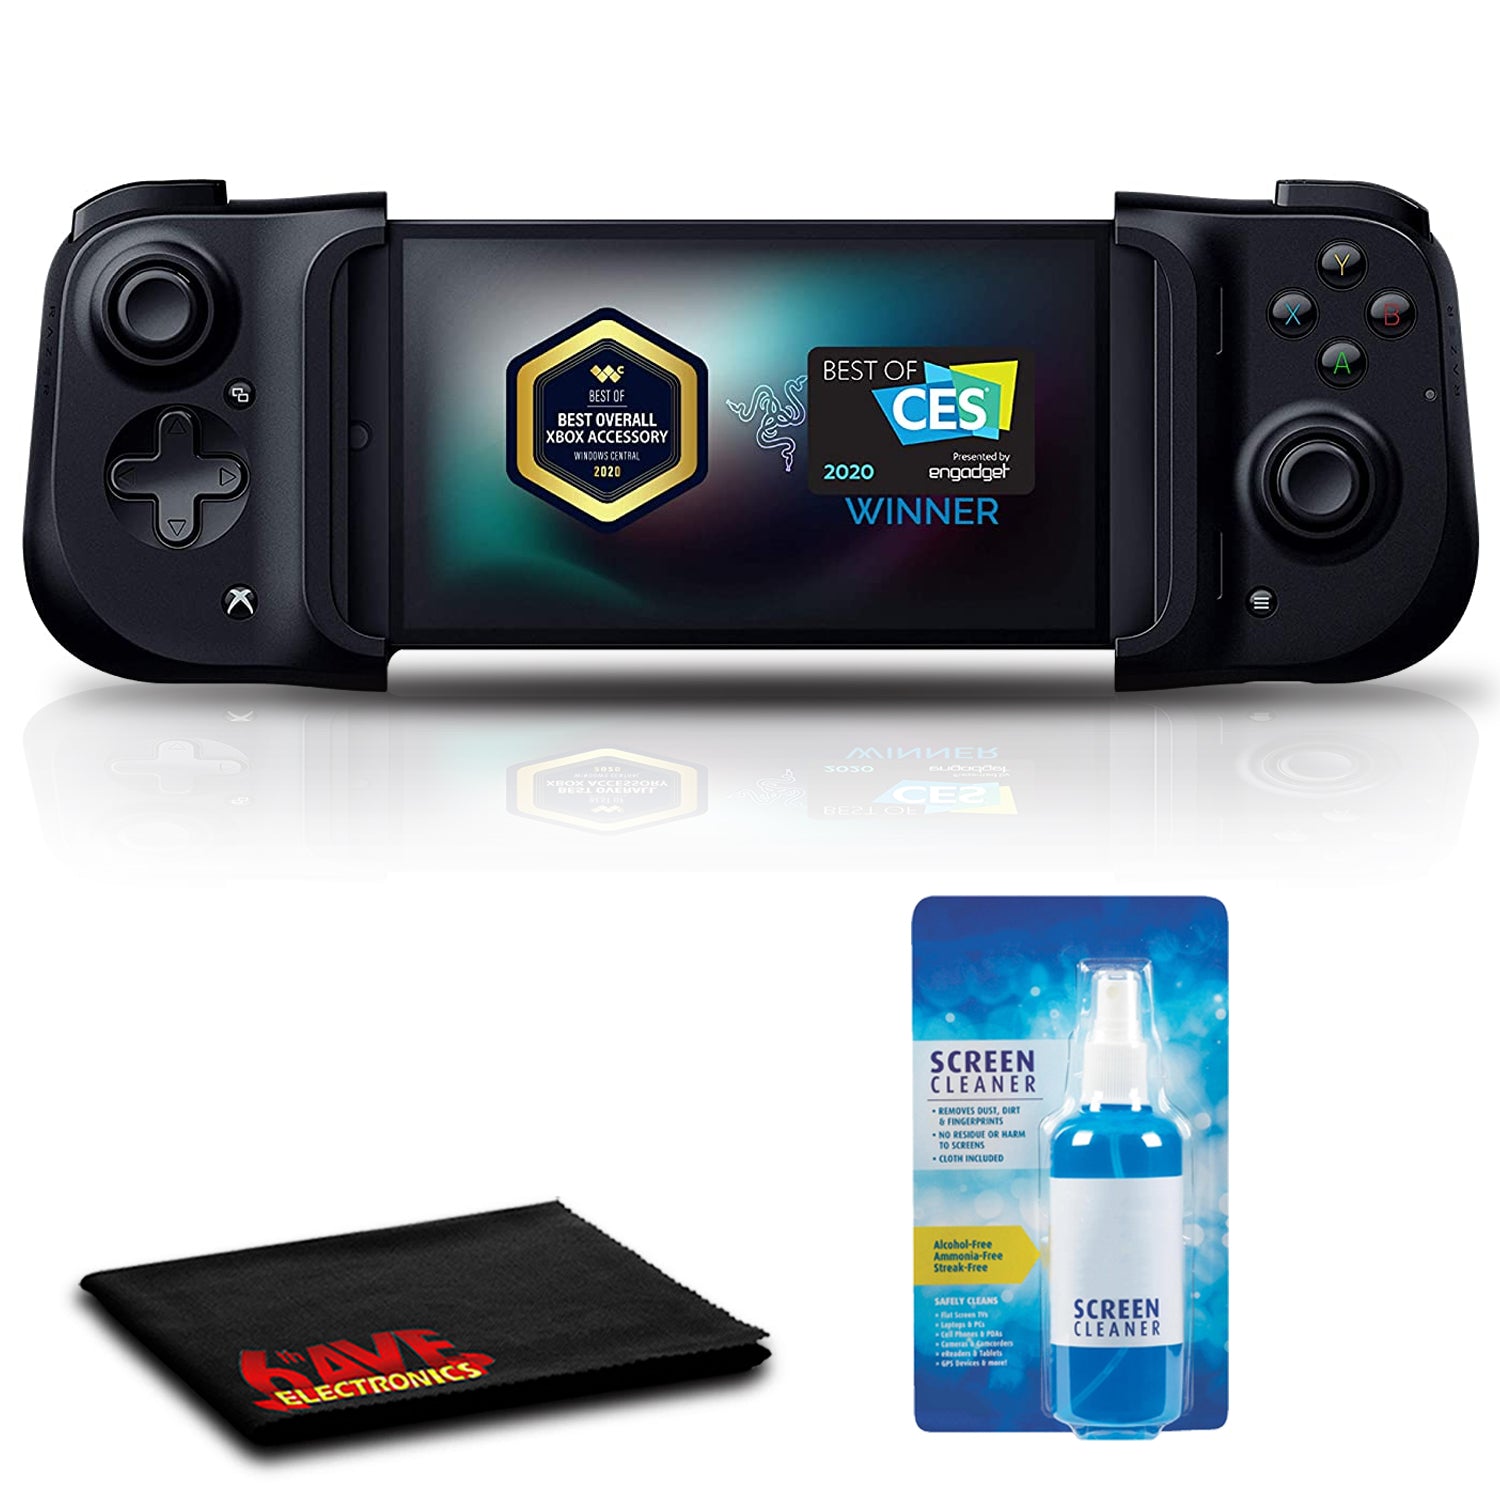 Razer Kishi Universal Mobile Gaming Controller for Android with Cleaning Kit Bundle